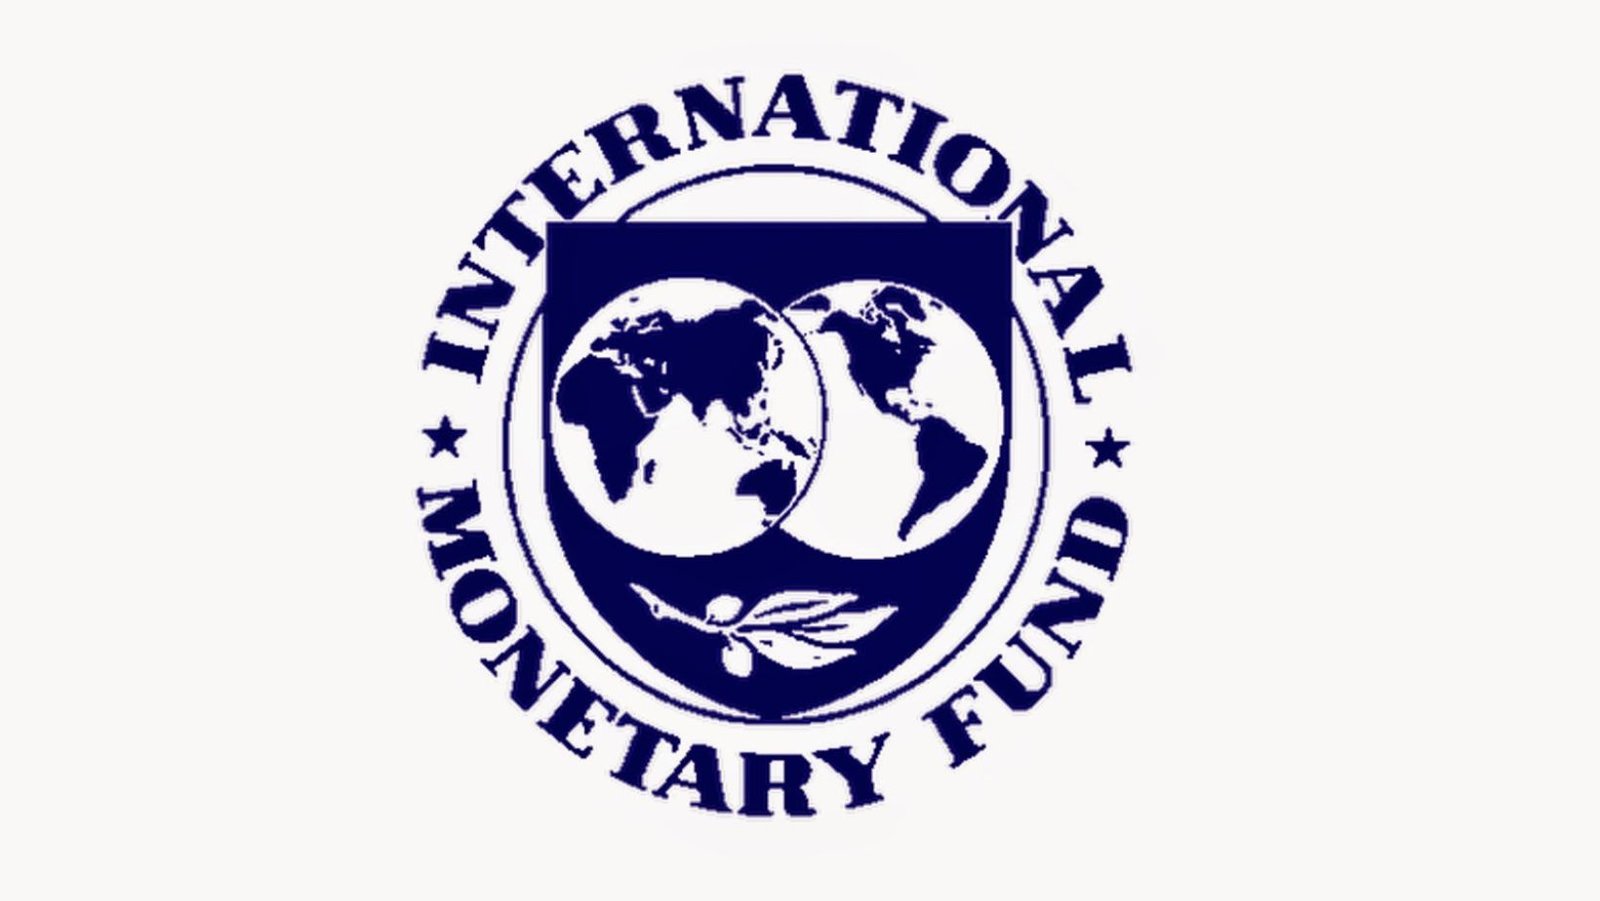 Pakistan fell short of IMF goals, according to a report